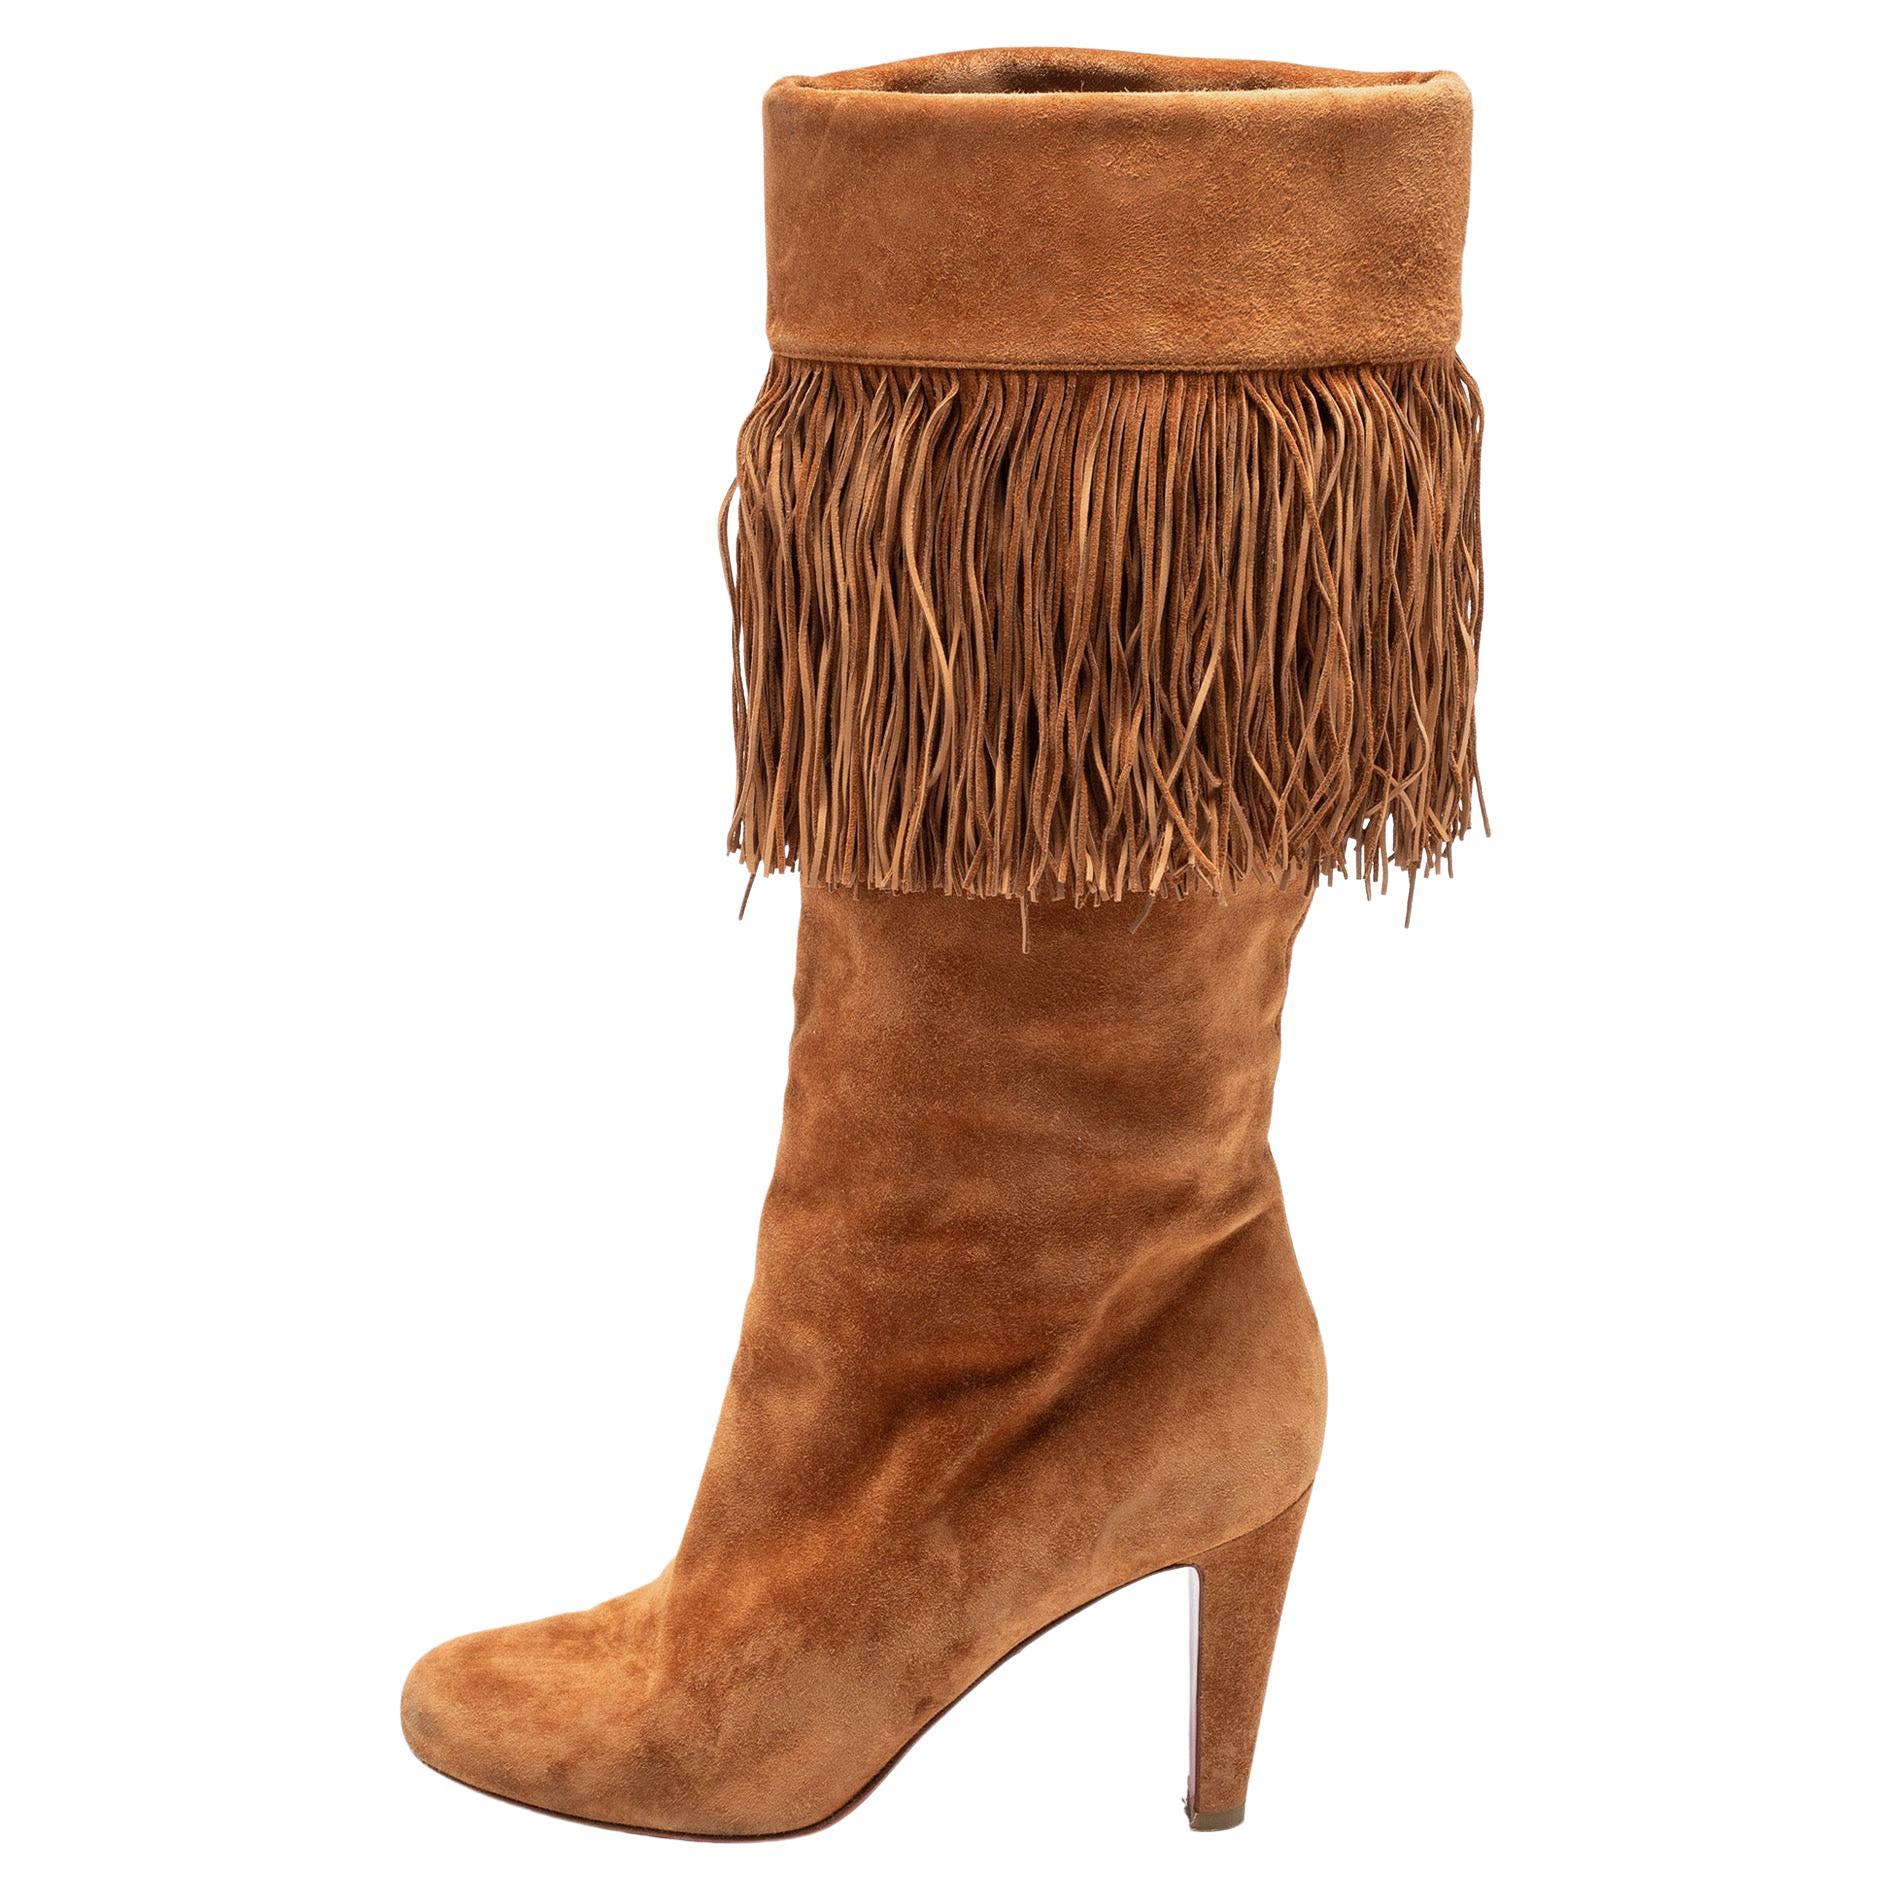 Christian Louboutin Brown Suede Fringe Mid Calf Boots Size 38